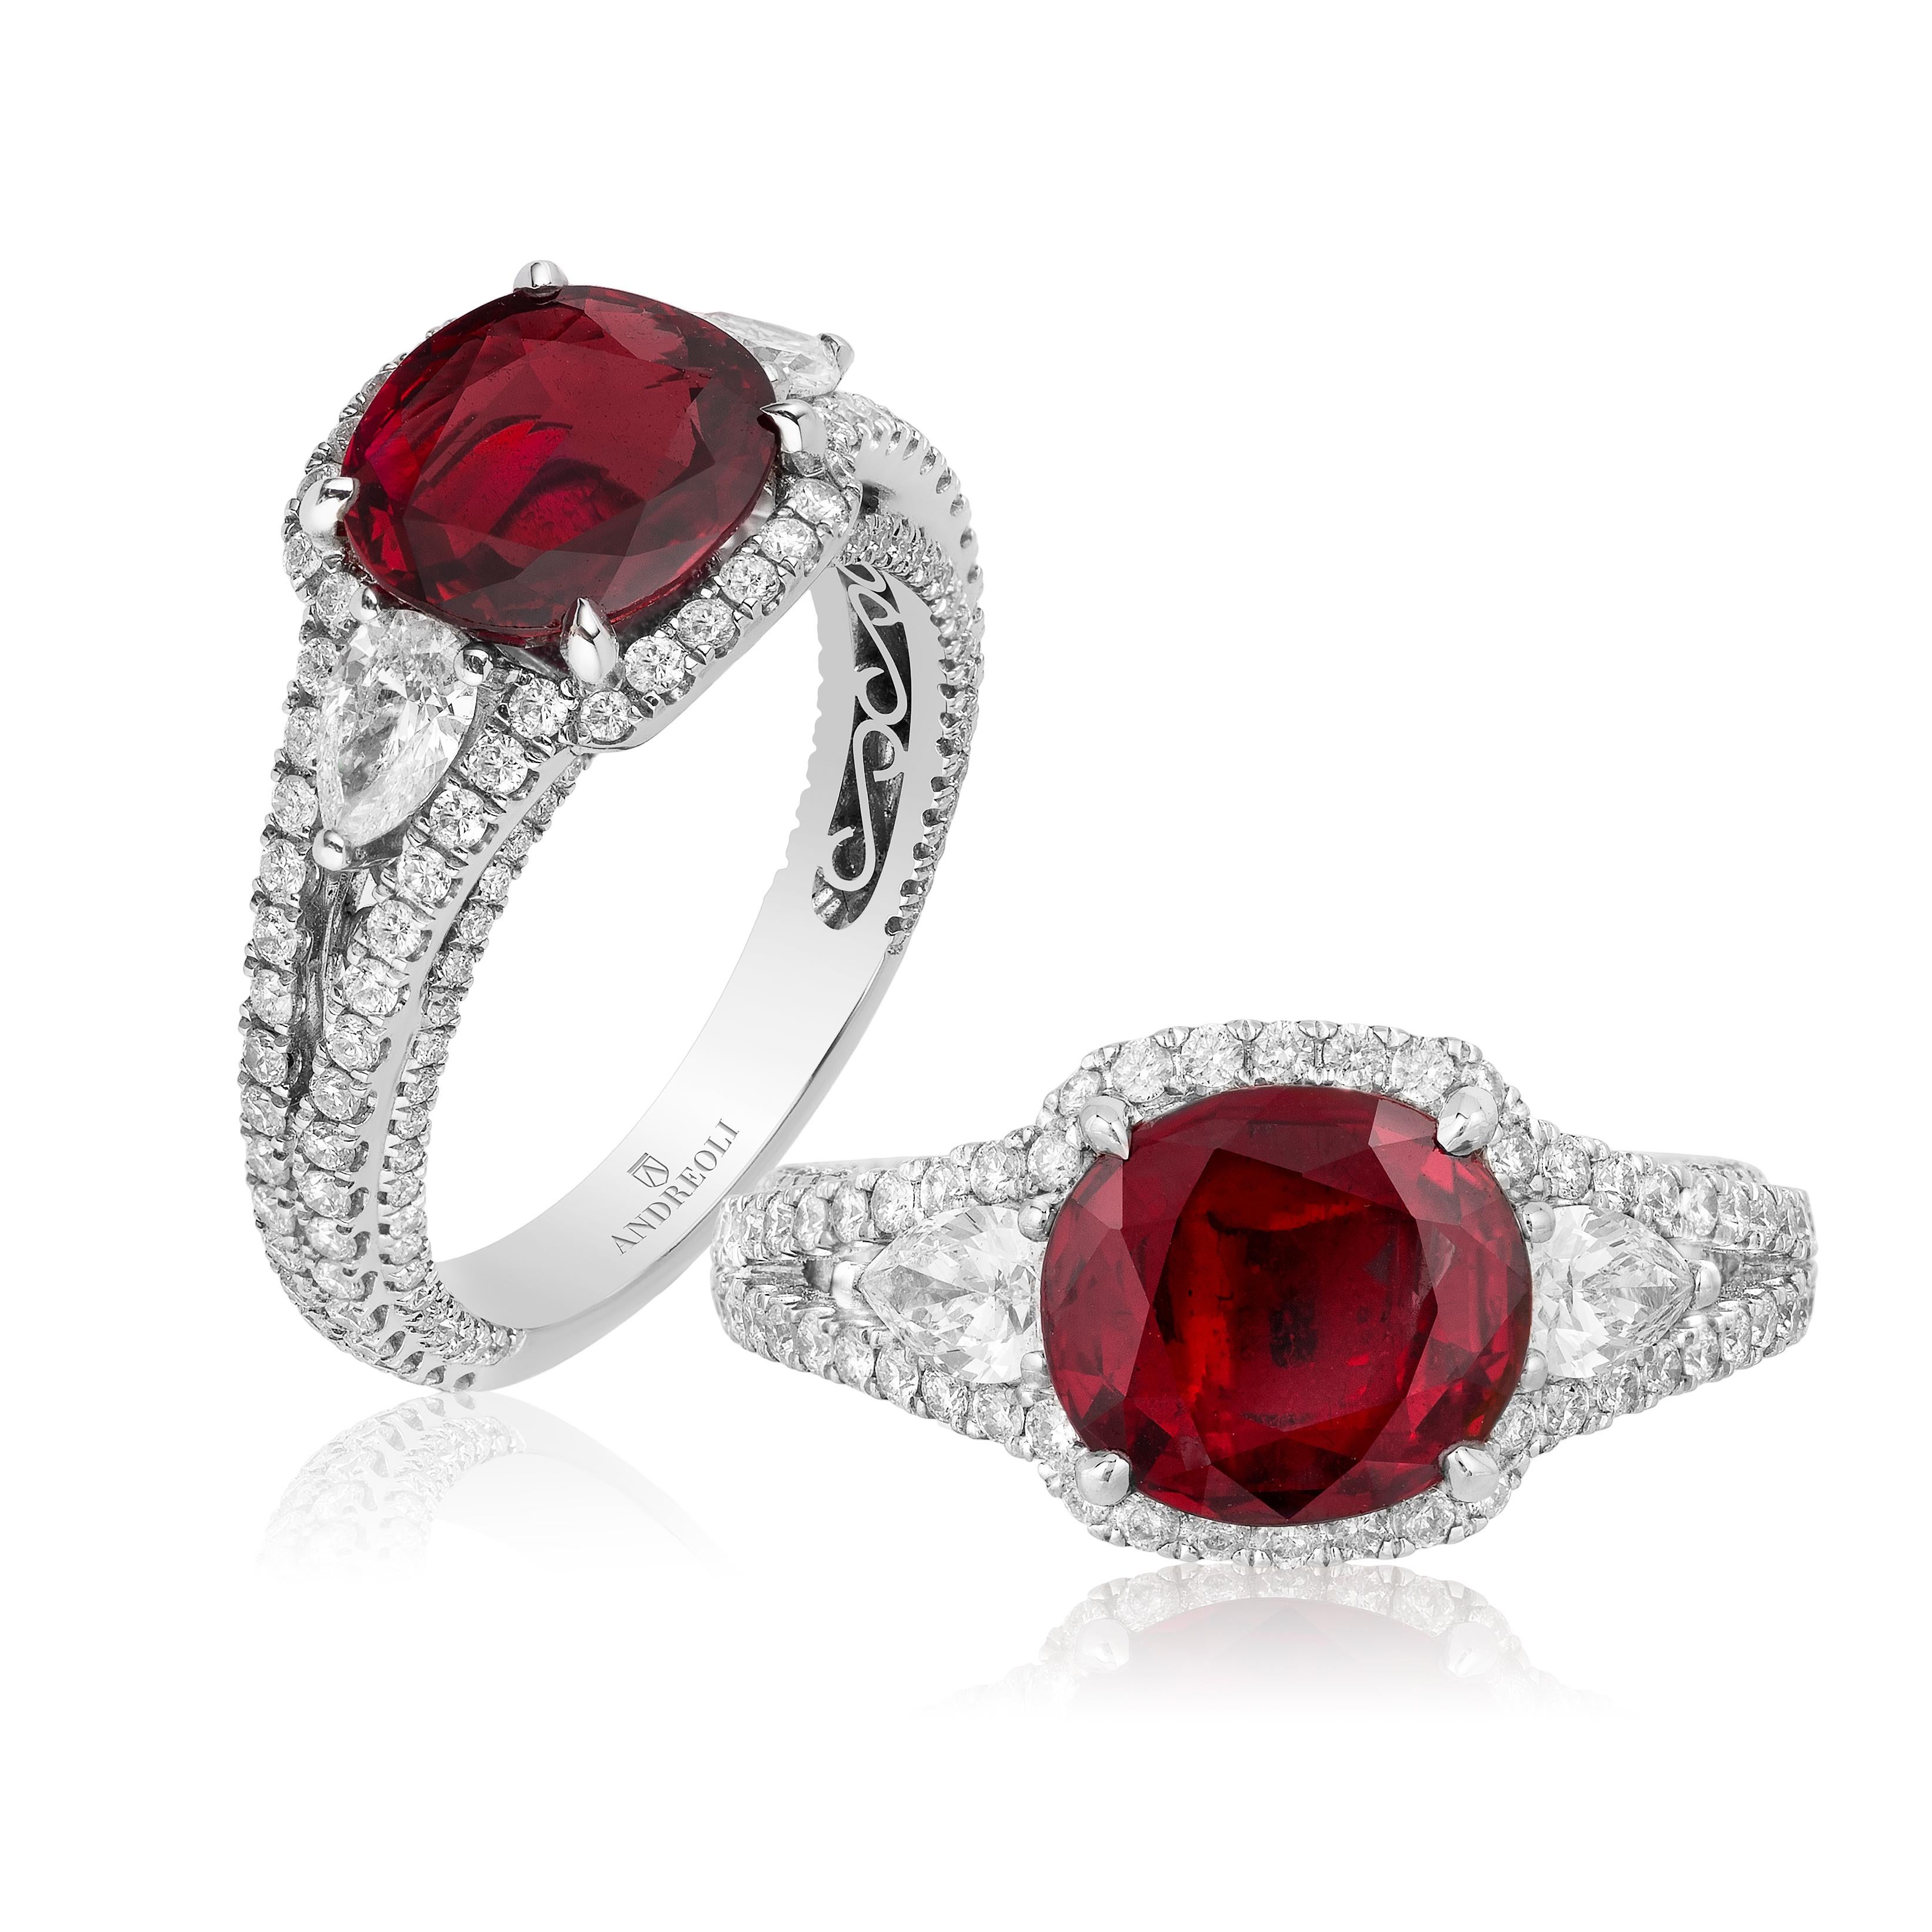 Women's or Men's Andreoli GIA Certified 1.98 Carat Pigeon Blood Ruby Thailand Diamond Ring 